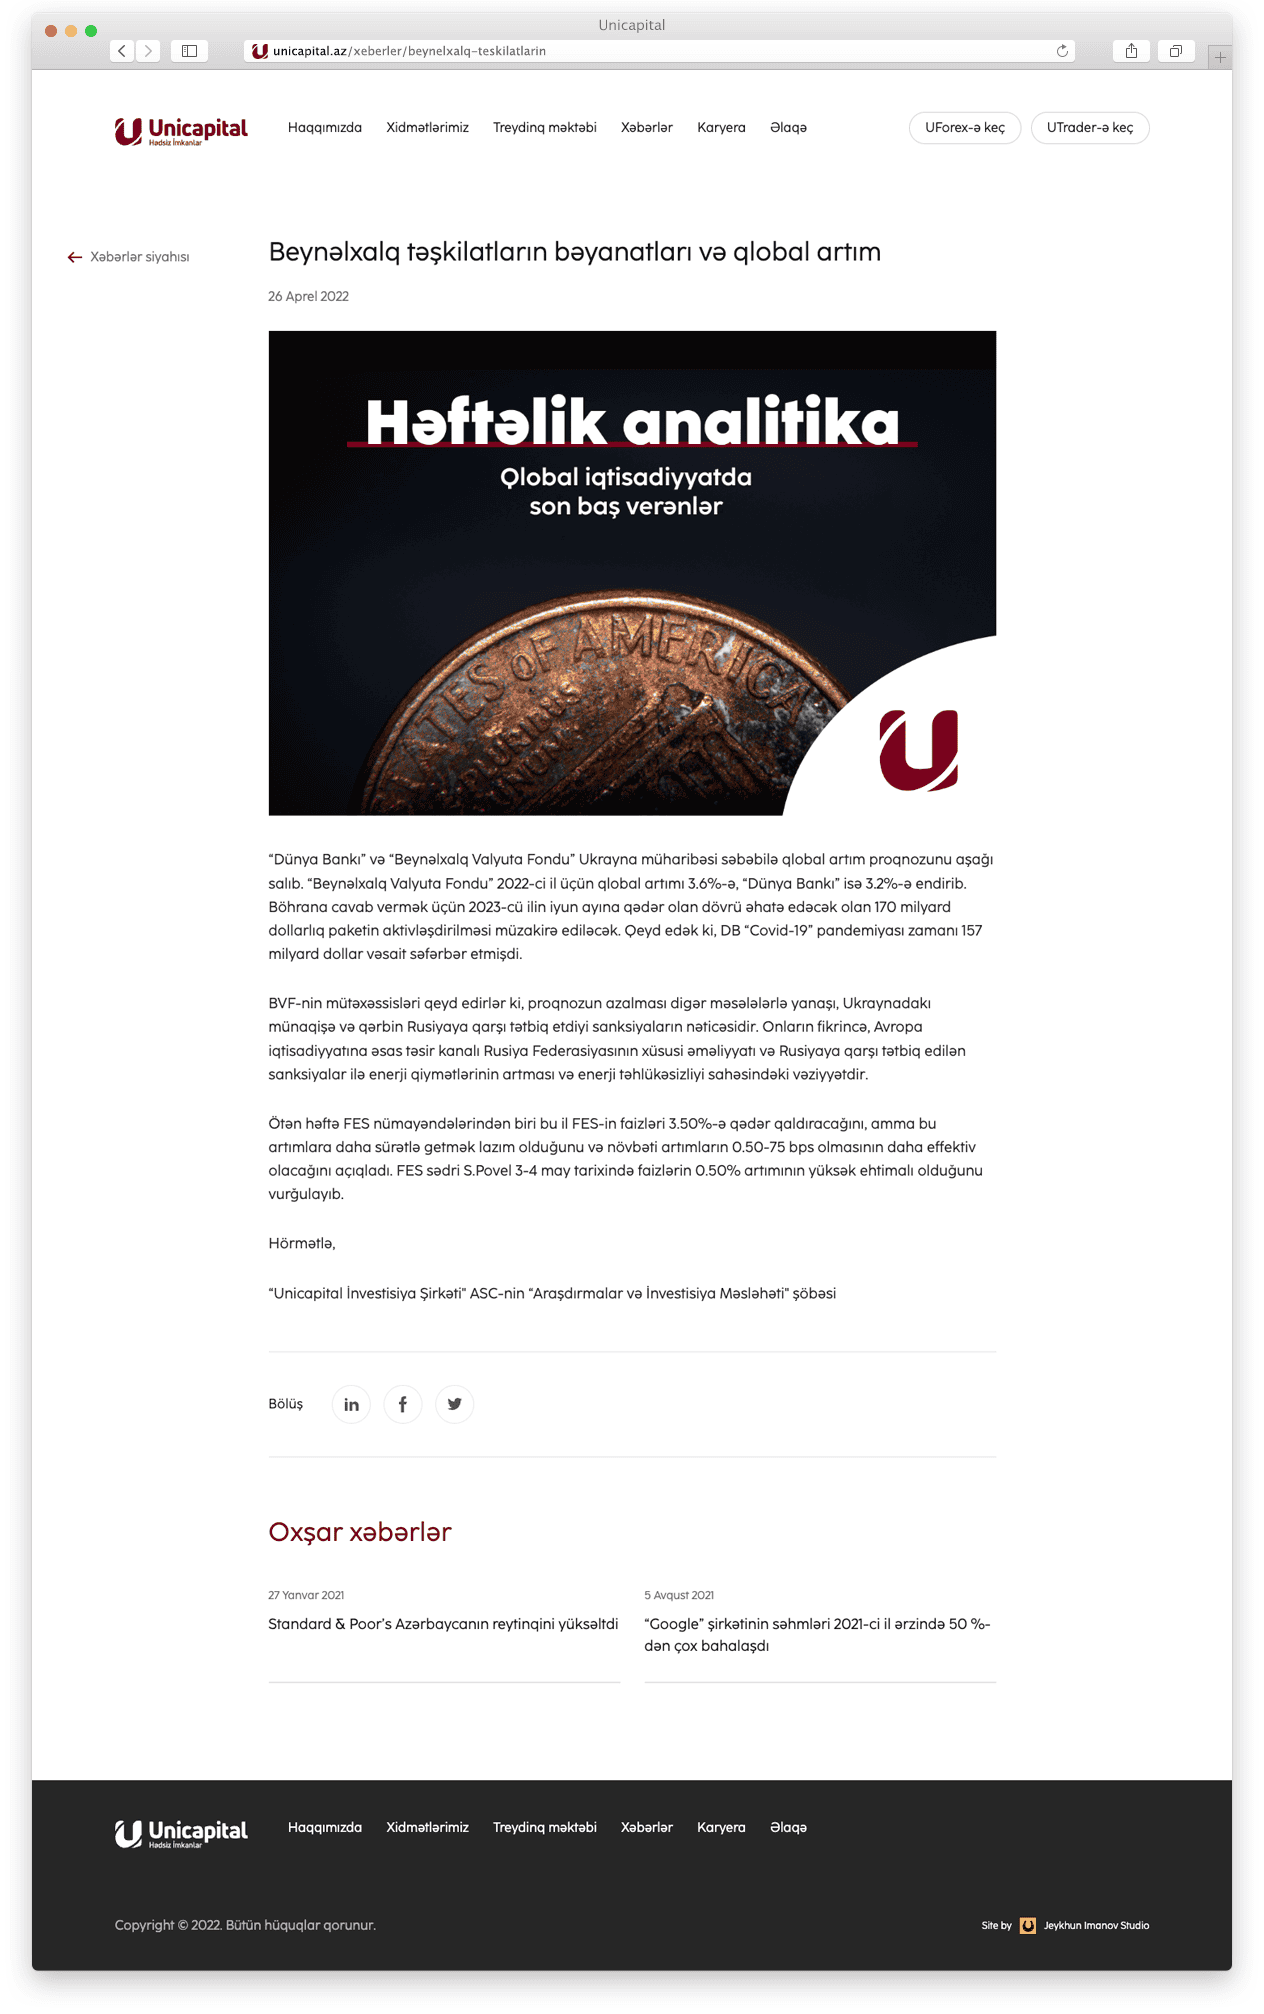 Website for Unicapital 5.png